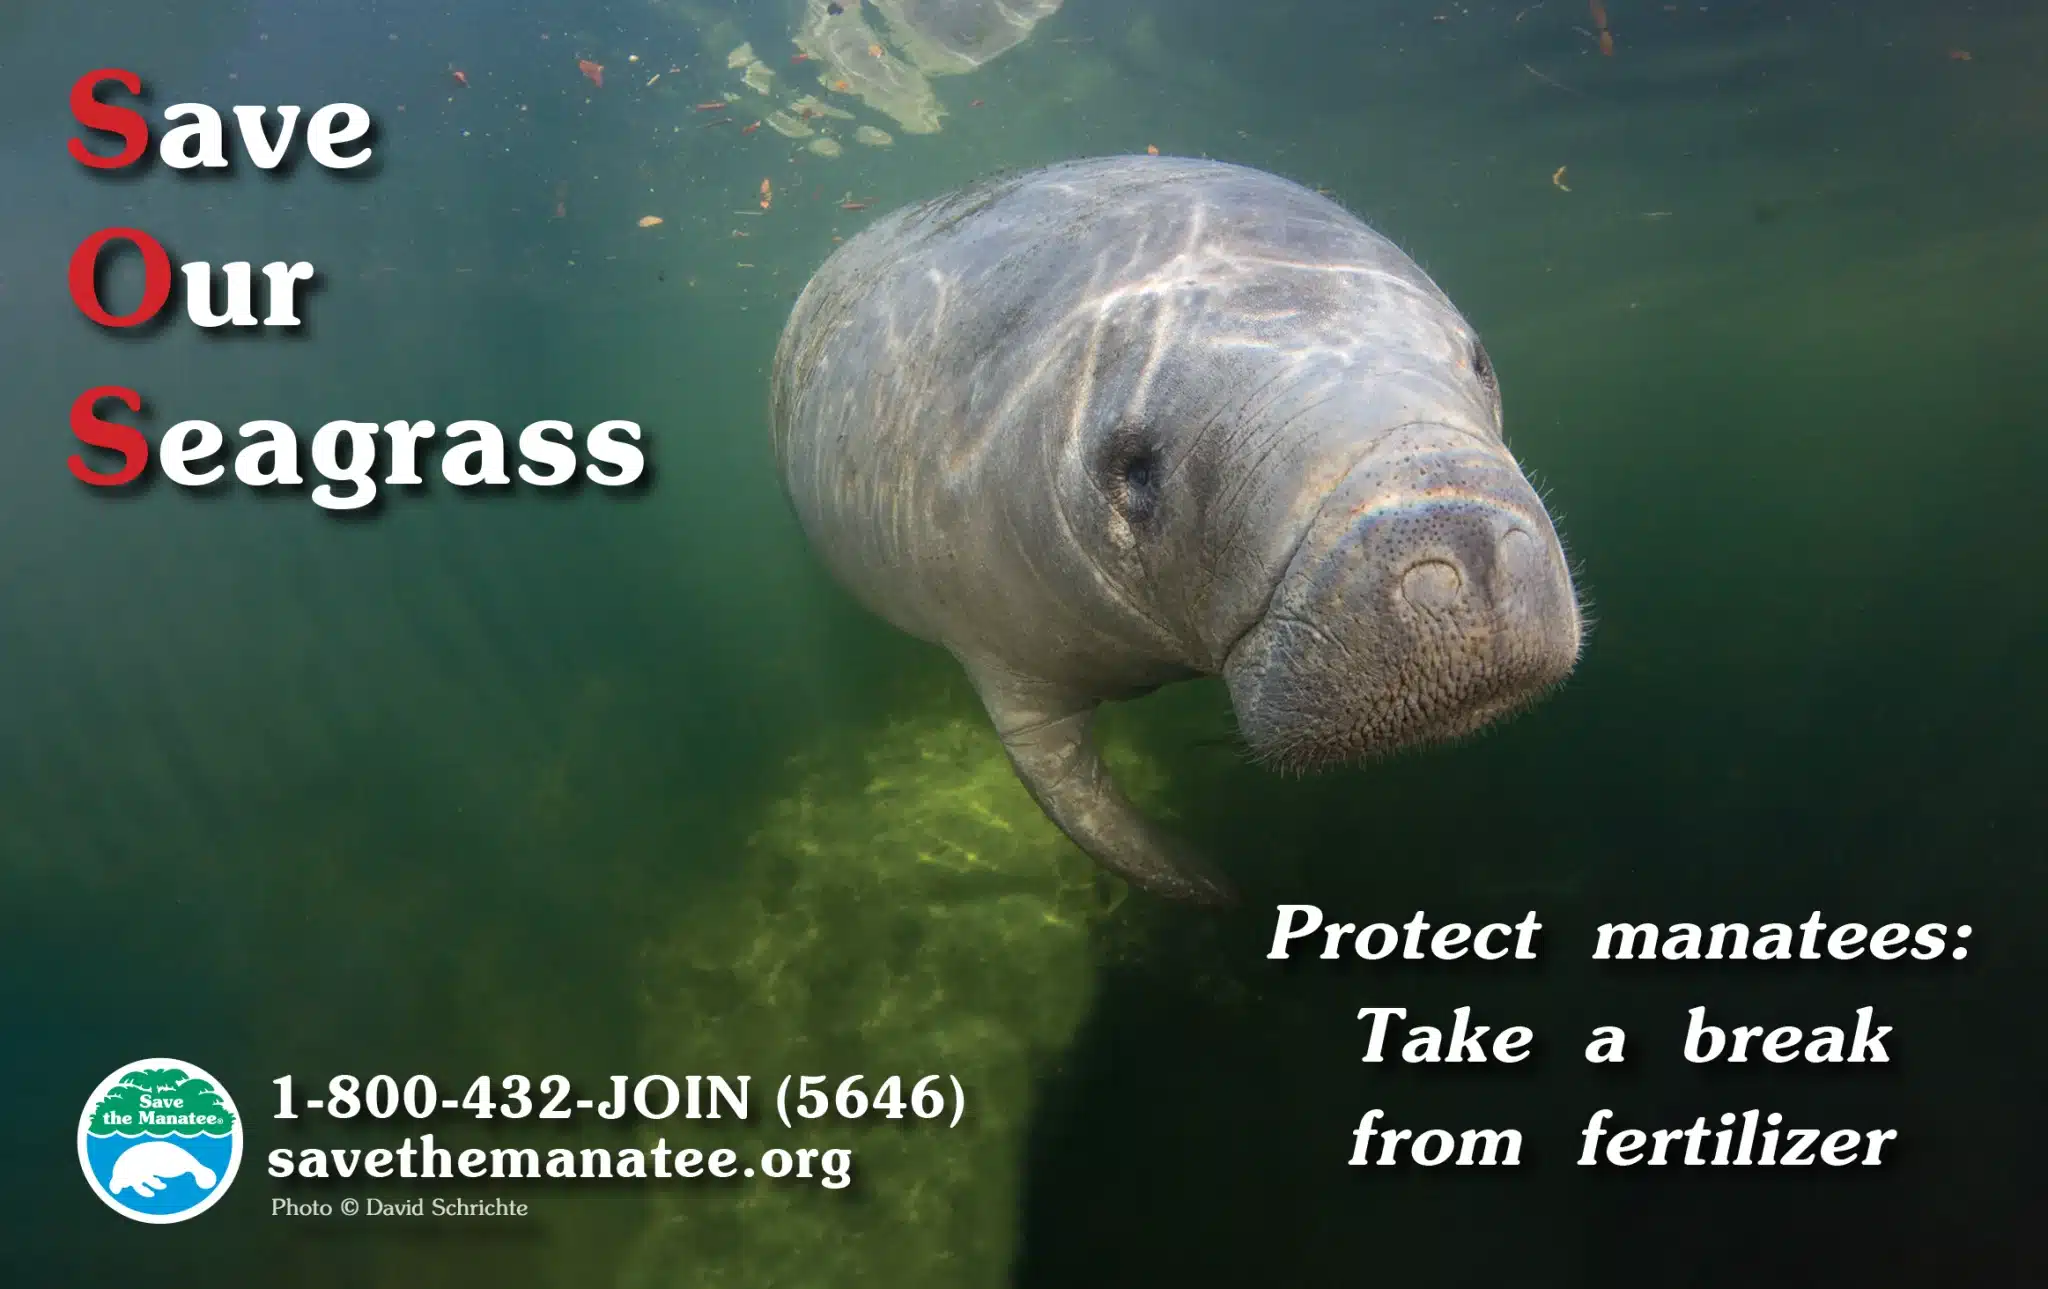 A PSA featuring a closeup of a manatee face with the text, "Save Our Seagrass. Protect manatees: Take a break from fertilizer."